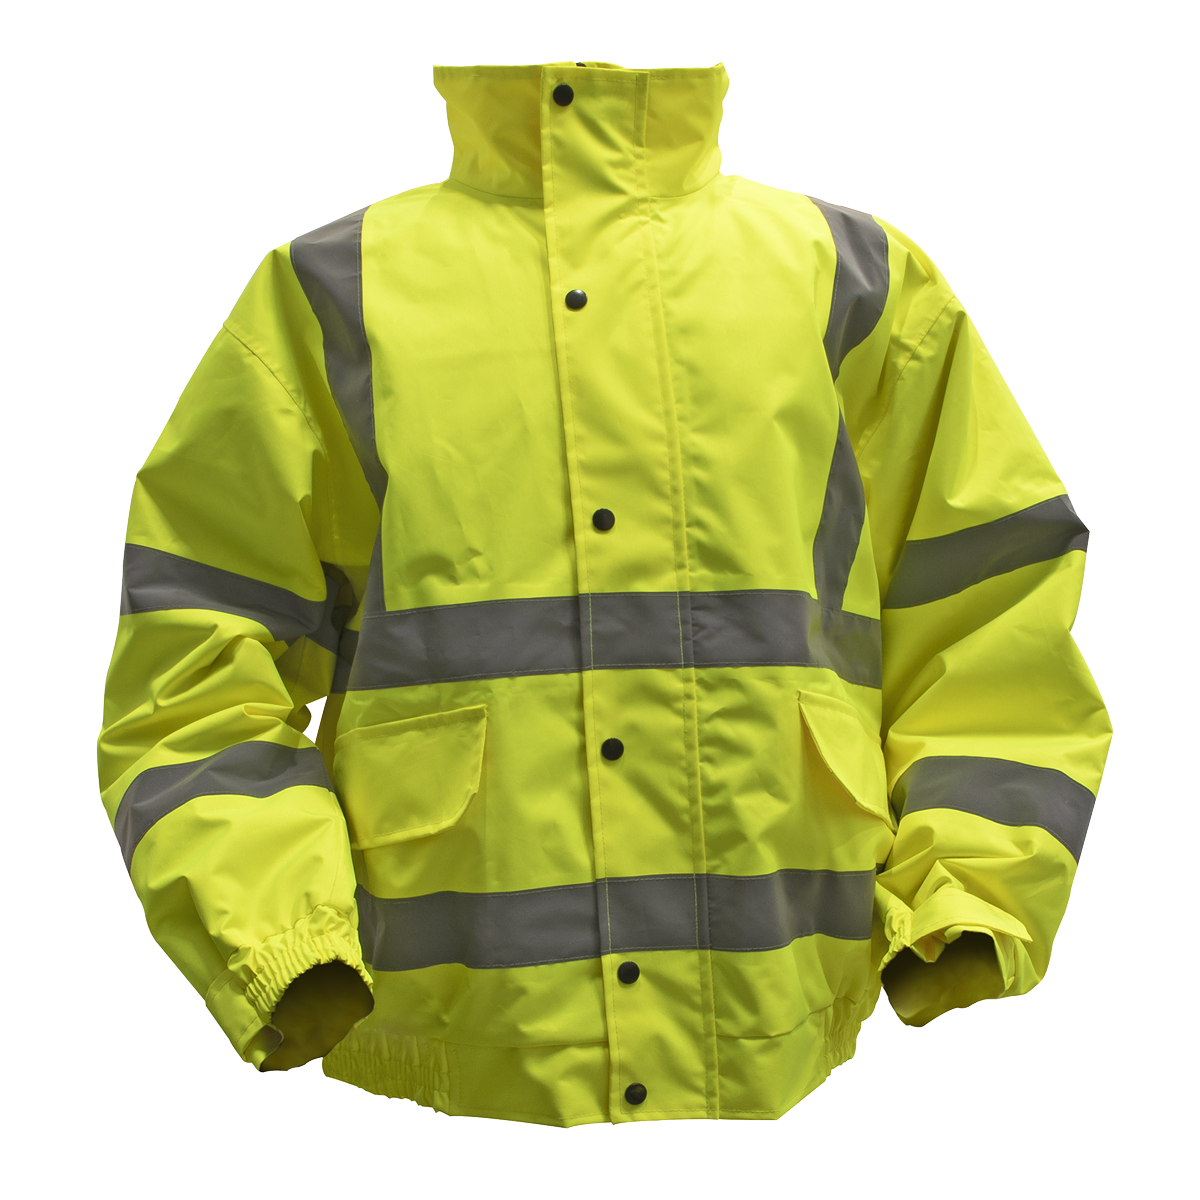 Sealey Hi-Vis Yellow Jacket with Quilted Lining & Elasticated Waist - XX-Large 802XXL